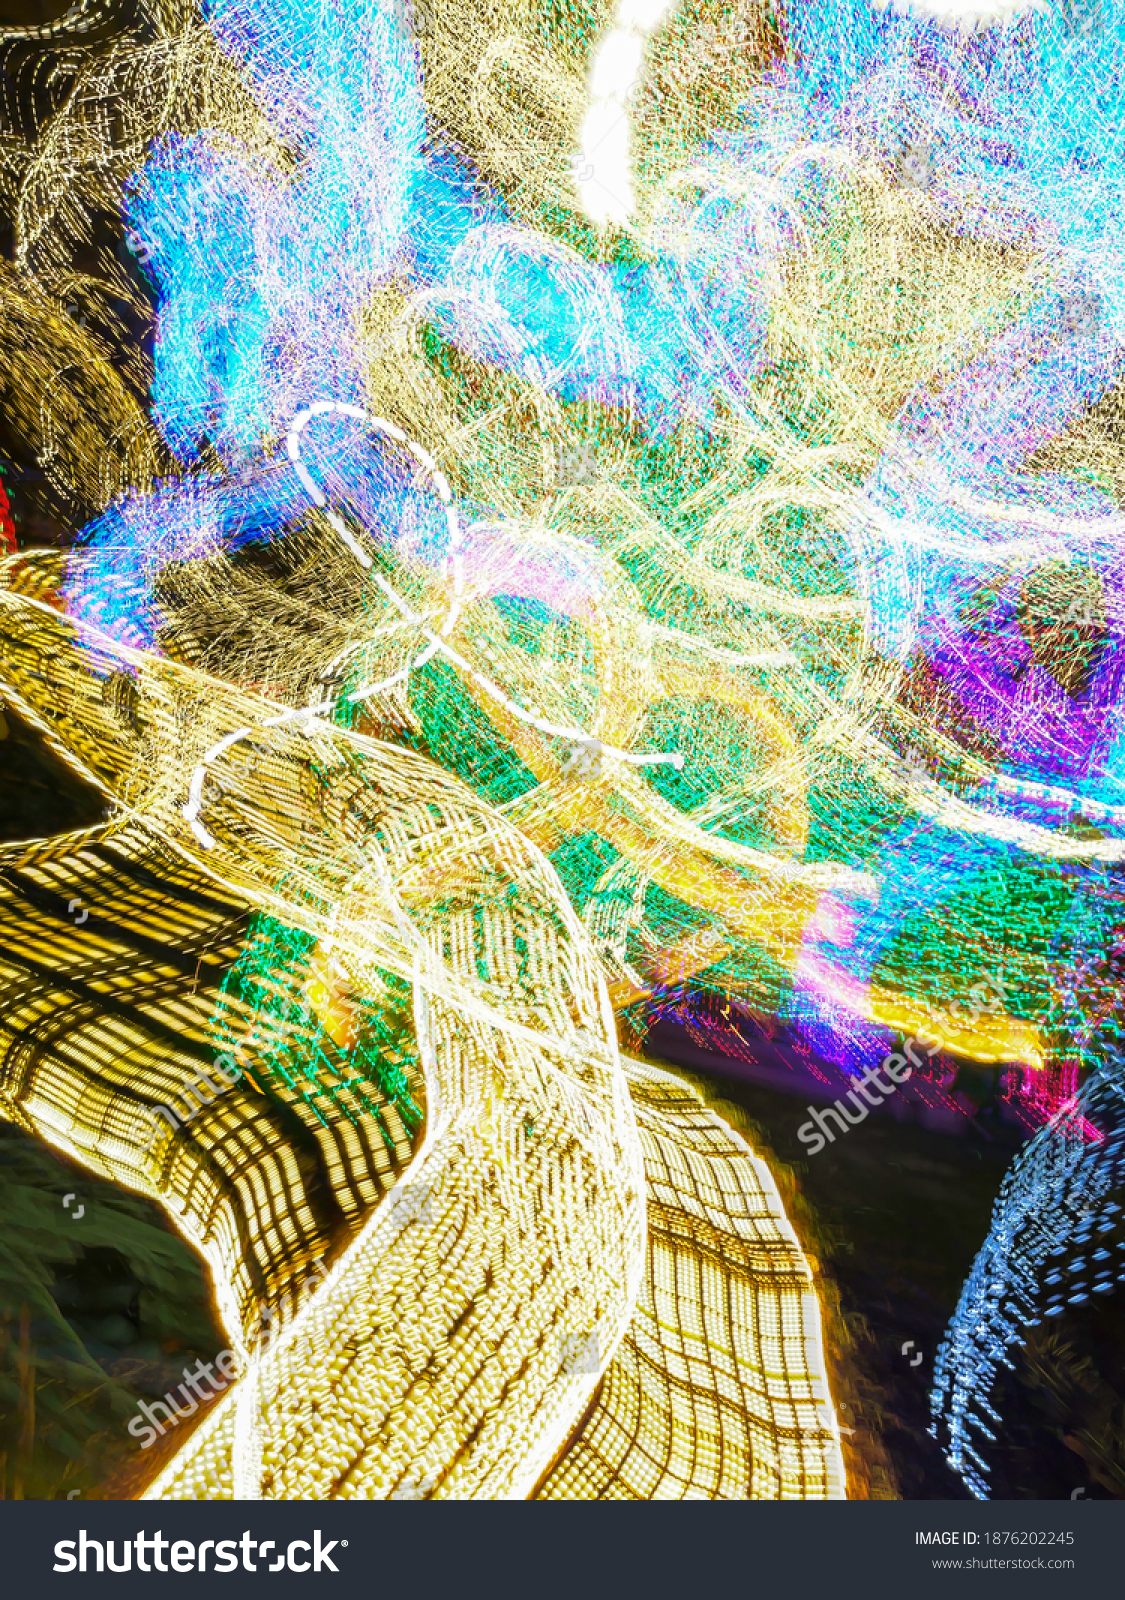 Otherworldly light trails of light-emitting diodes (LEDs) that provide holiday illumination in a festive garden at night. Long exposure with motion blur. Painting with light. #1876202245